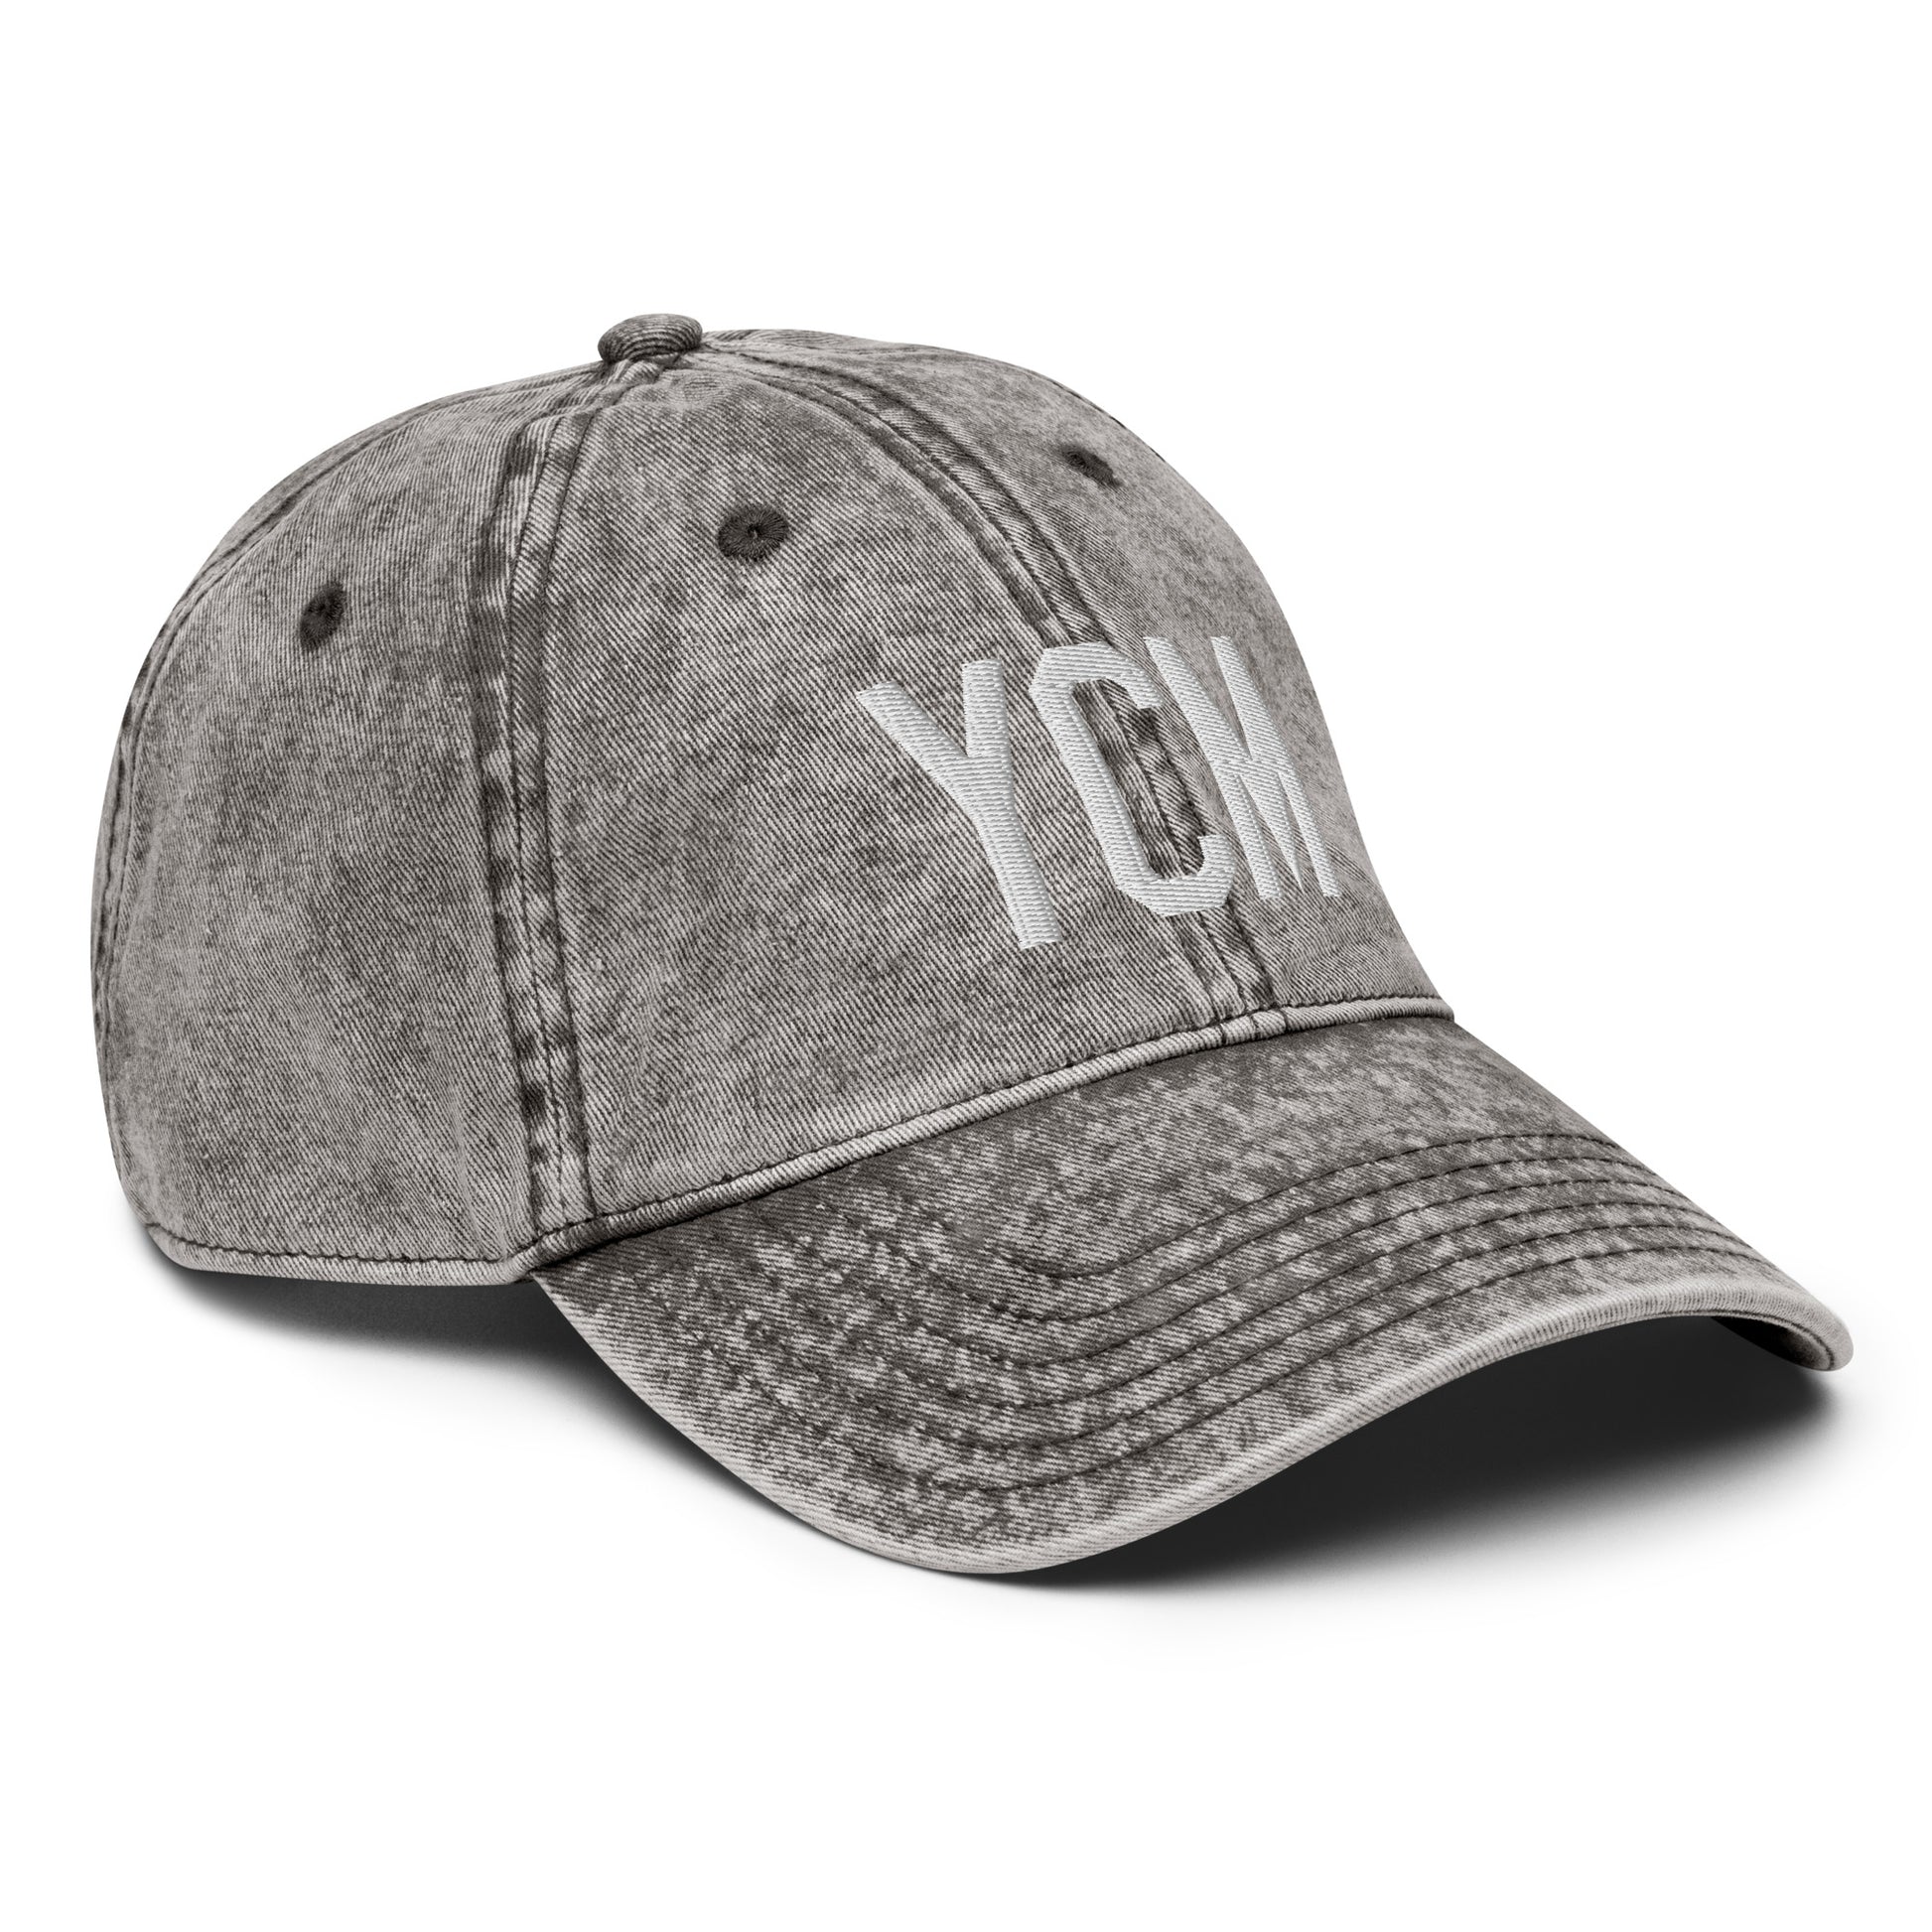 Airport Code Twill Cap - White • YCM St. Catharines • YHM Designs - Image 30